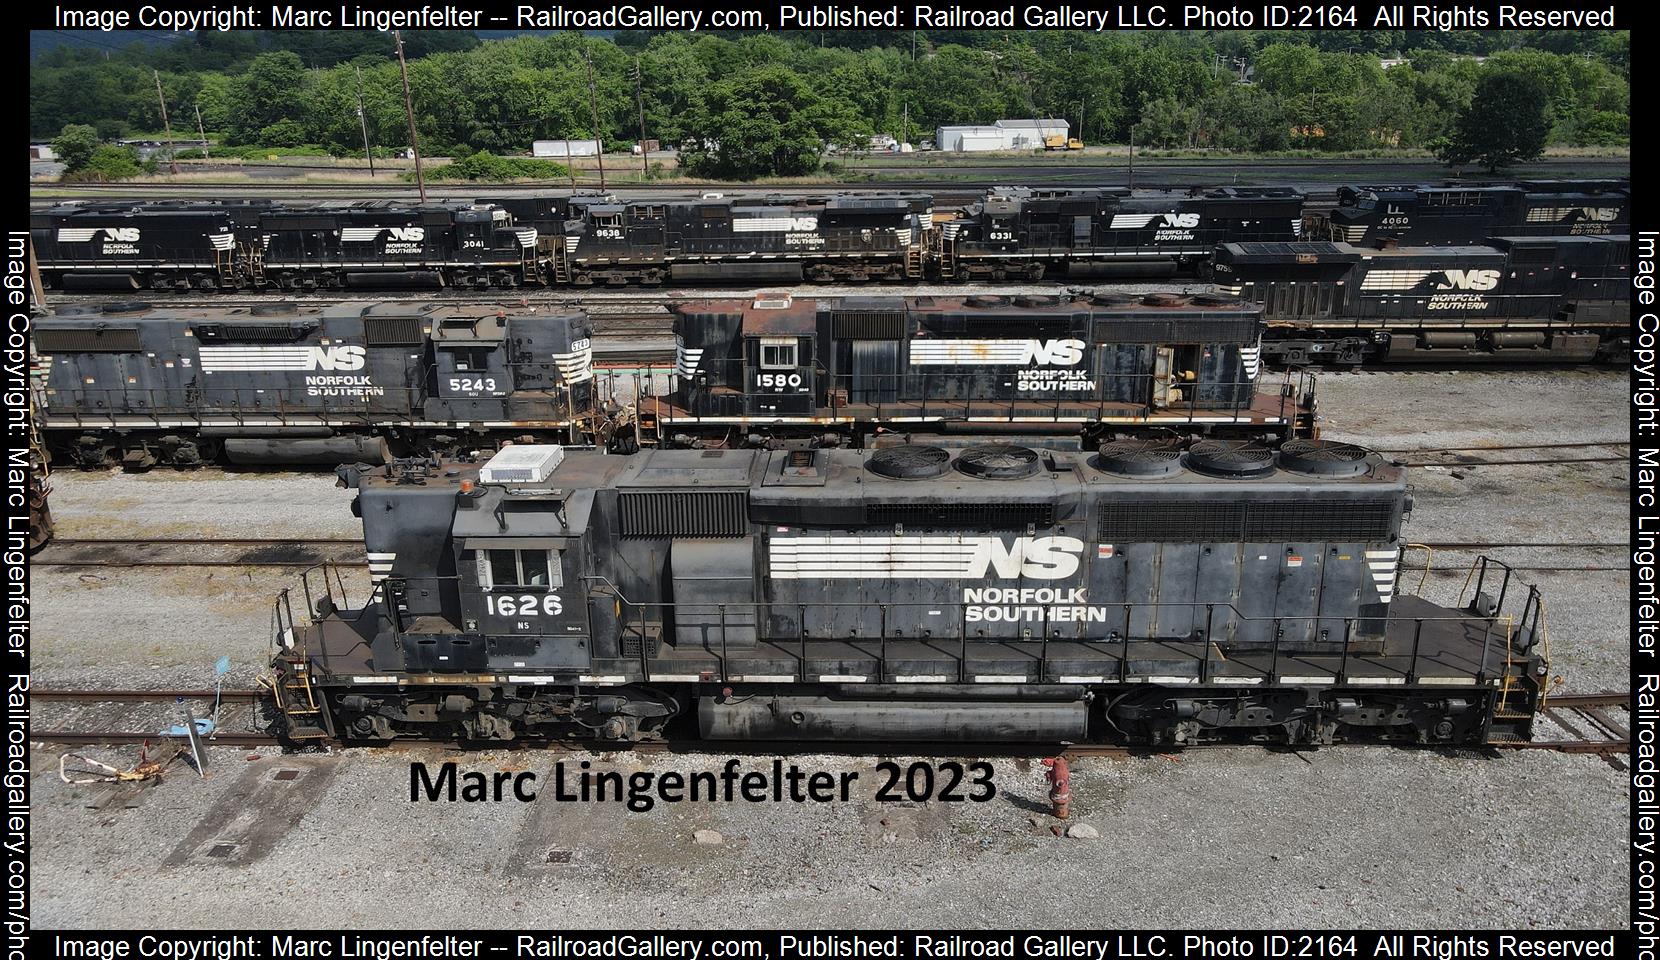 NS 1626 is a class EMD SD40-2 and  is pictured in Altoona, Pennsylvania, USA.  This was taken along the NS Juniata Shops on the Norfolk Southern. Photo Copyright: Marc Lingenfelter uploaded to Railroad Gallery on 06/26/2023. This photograph of NS 1626 was taken on Sunday, June 25, 2023. All Rights Reserved. 